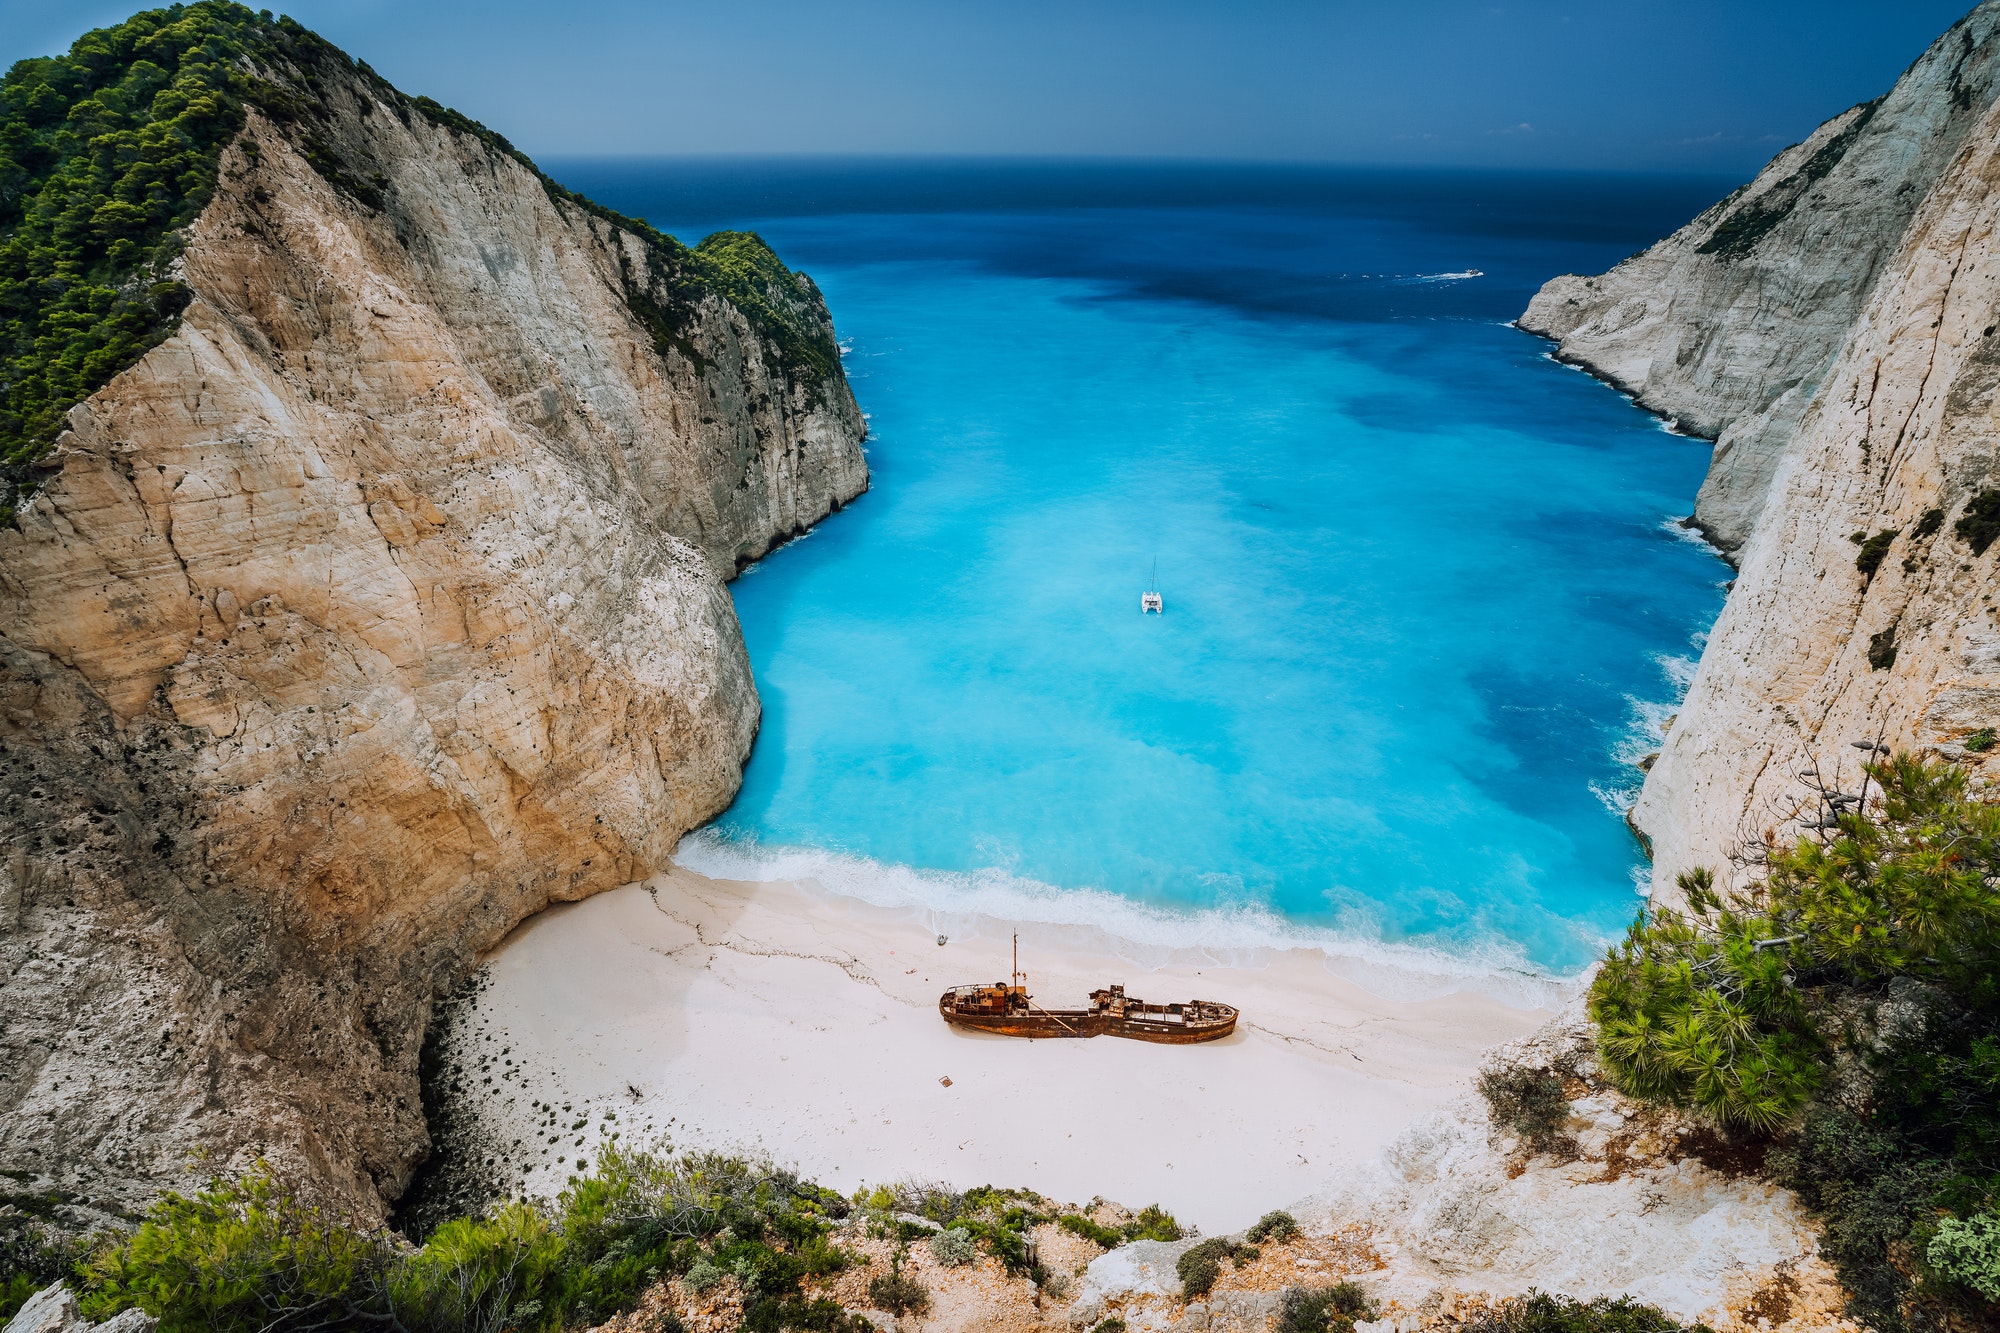 Epic view of Shipwreck middle of sandy Navagio beach surrounded by azure deep turquoise sea